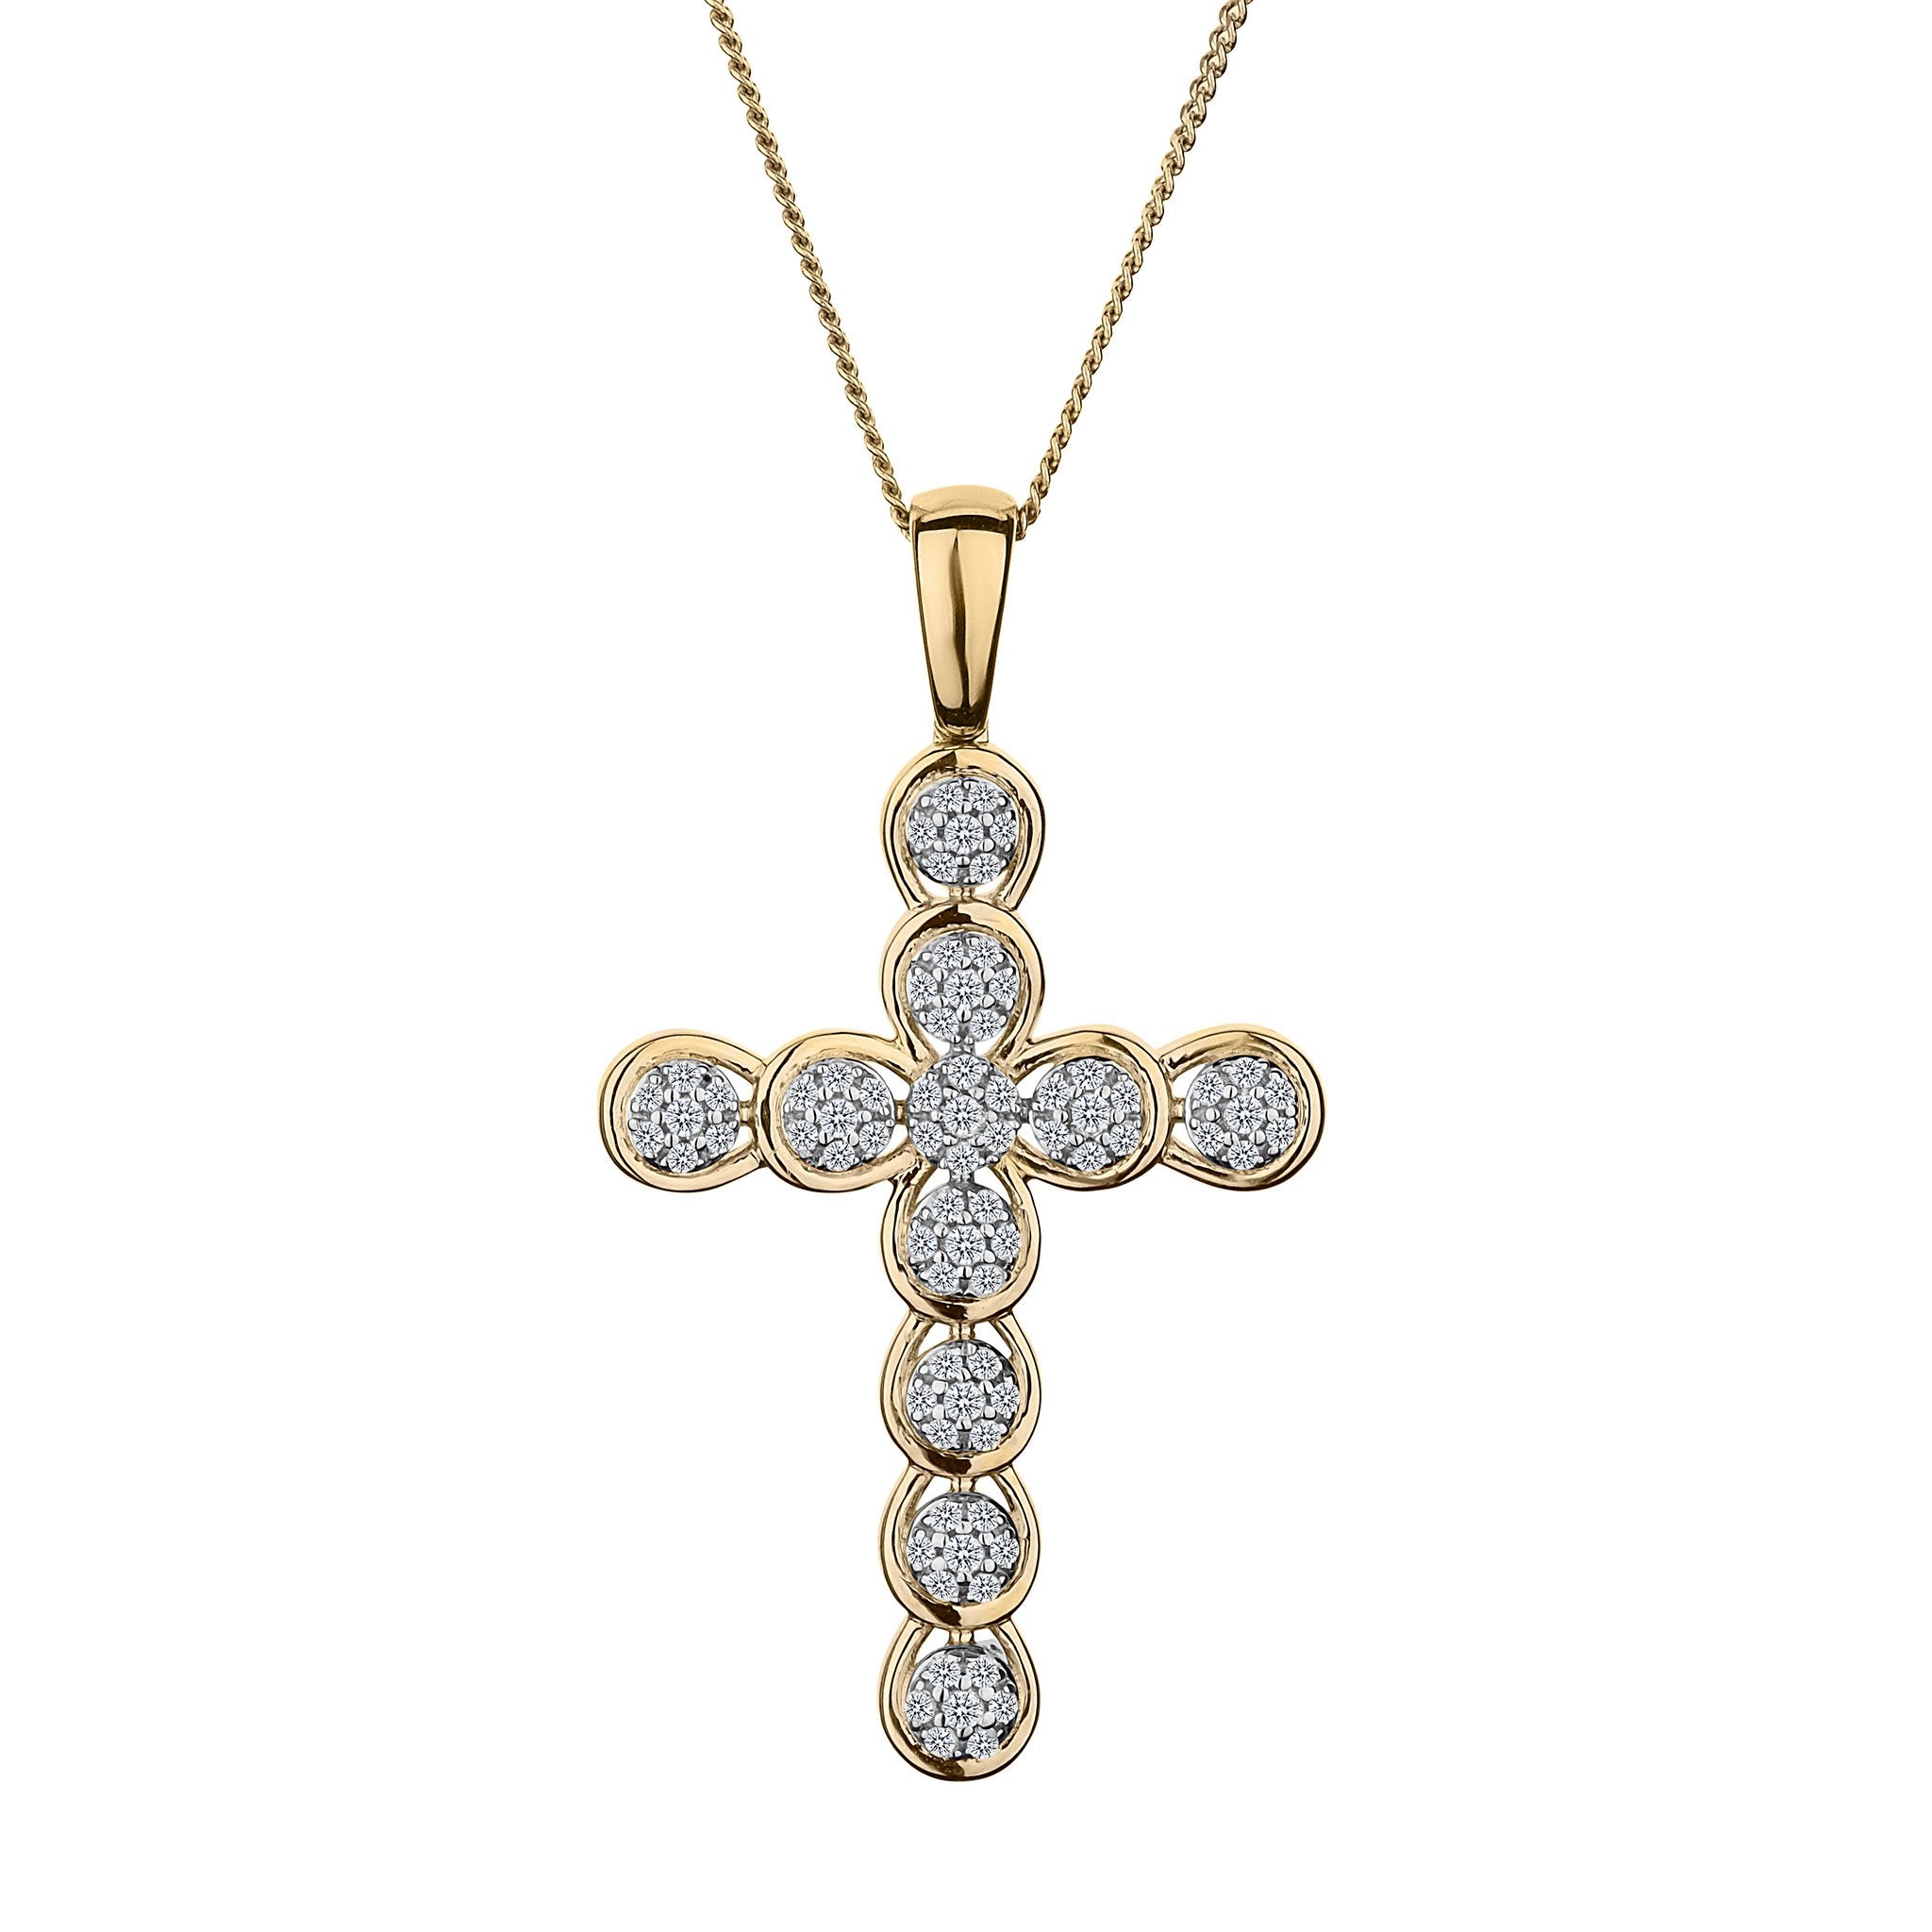 .25 Carat Diamond Pave Cross Pendant,  10kt Yellow Gold. Necklaces and Pendants. Griffin Jewellery Designs.